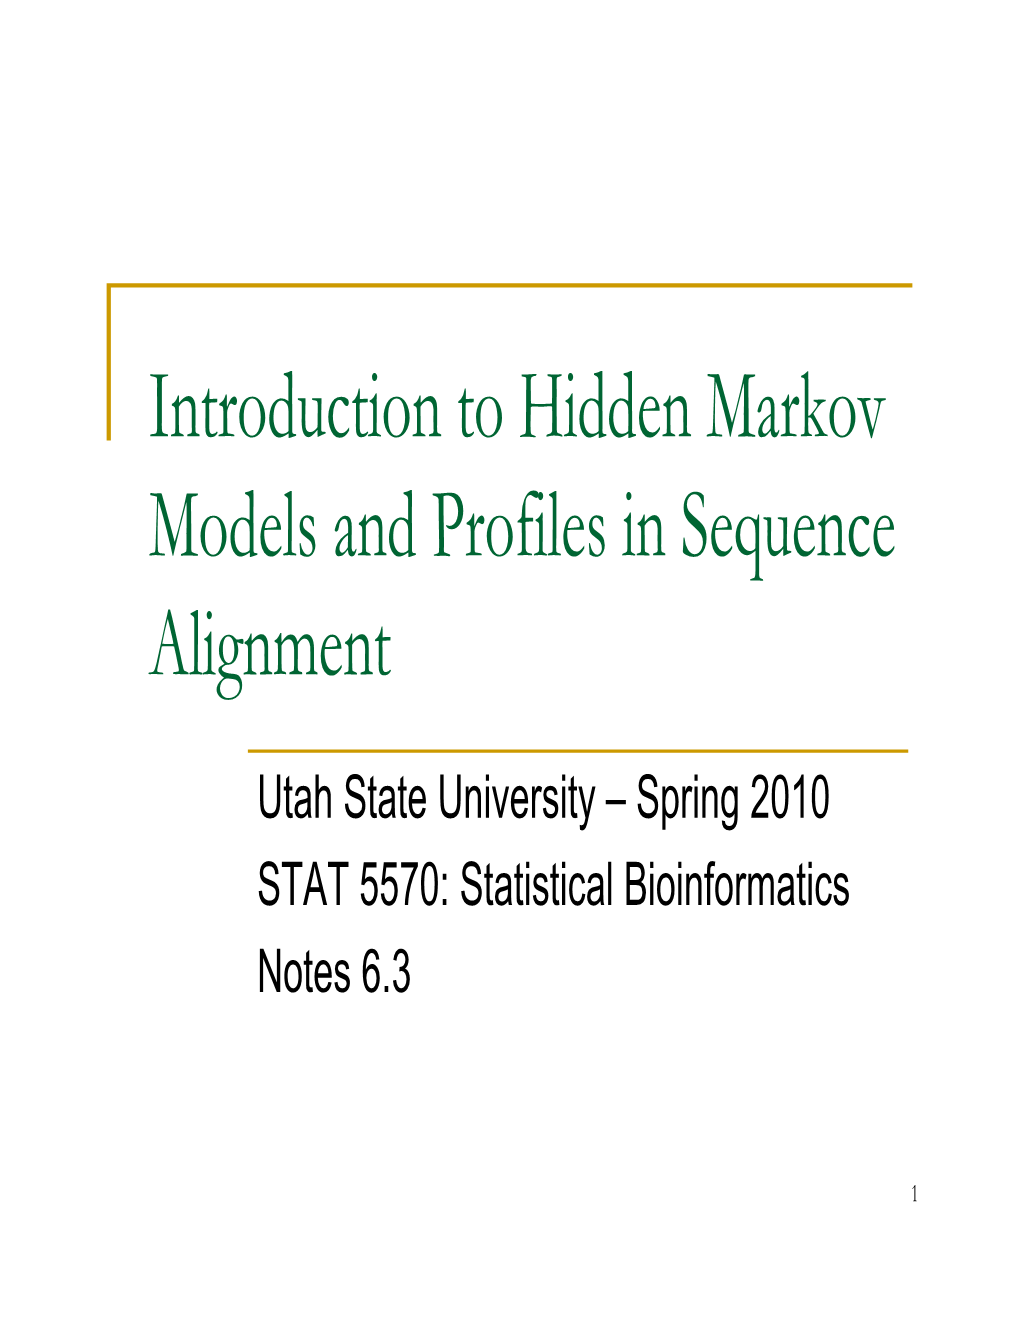 Introduction to Hidden Markov Models and Profiles in Sequence Alignment